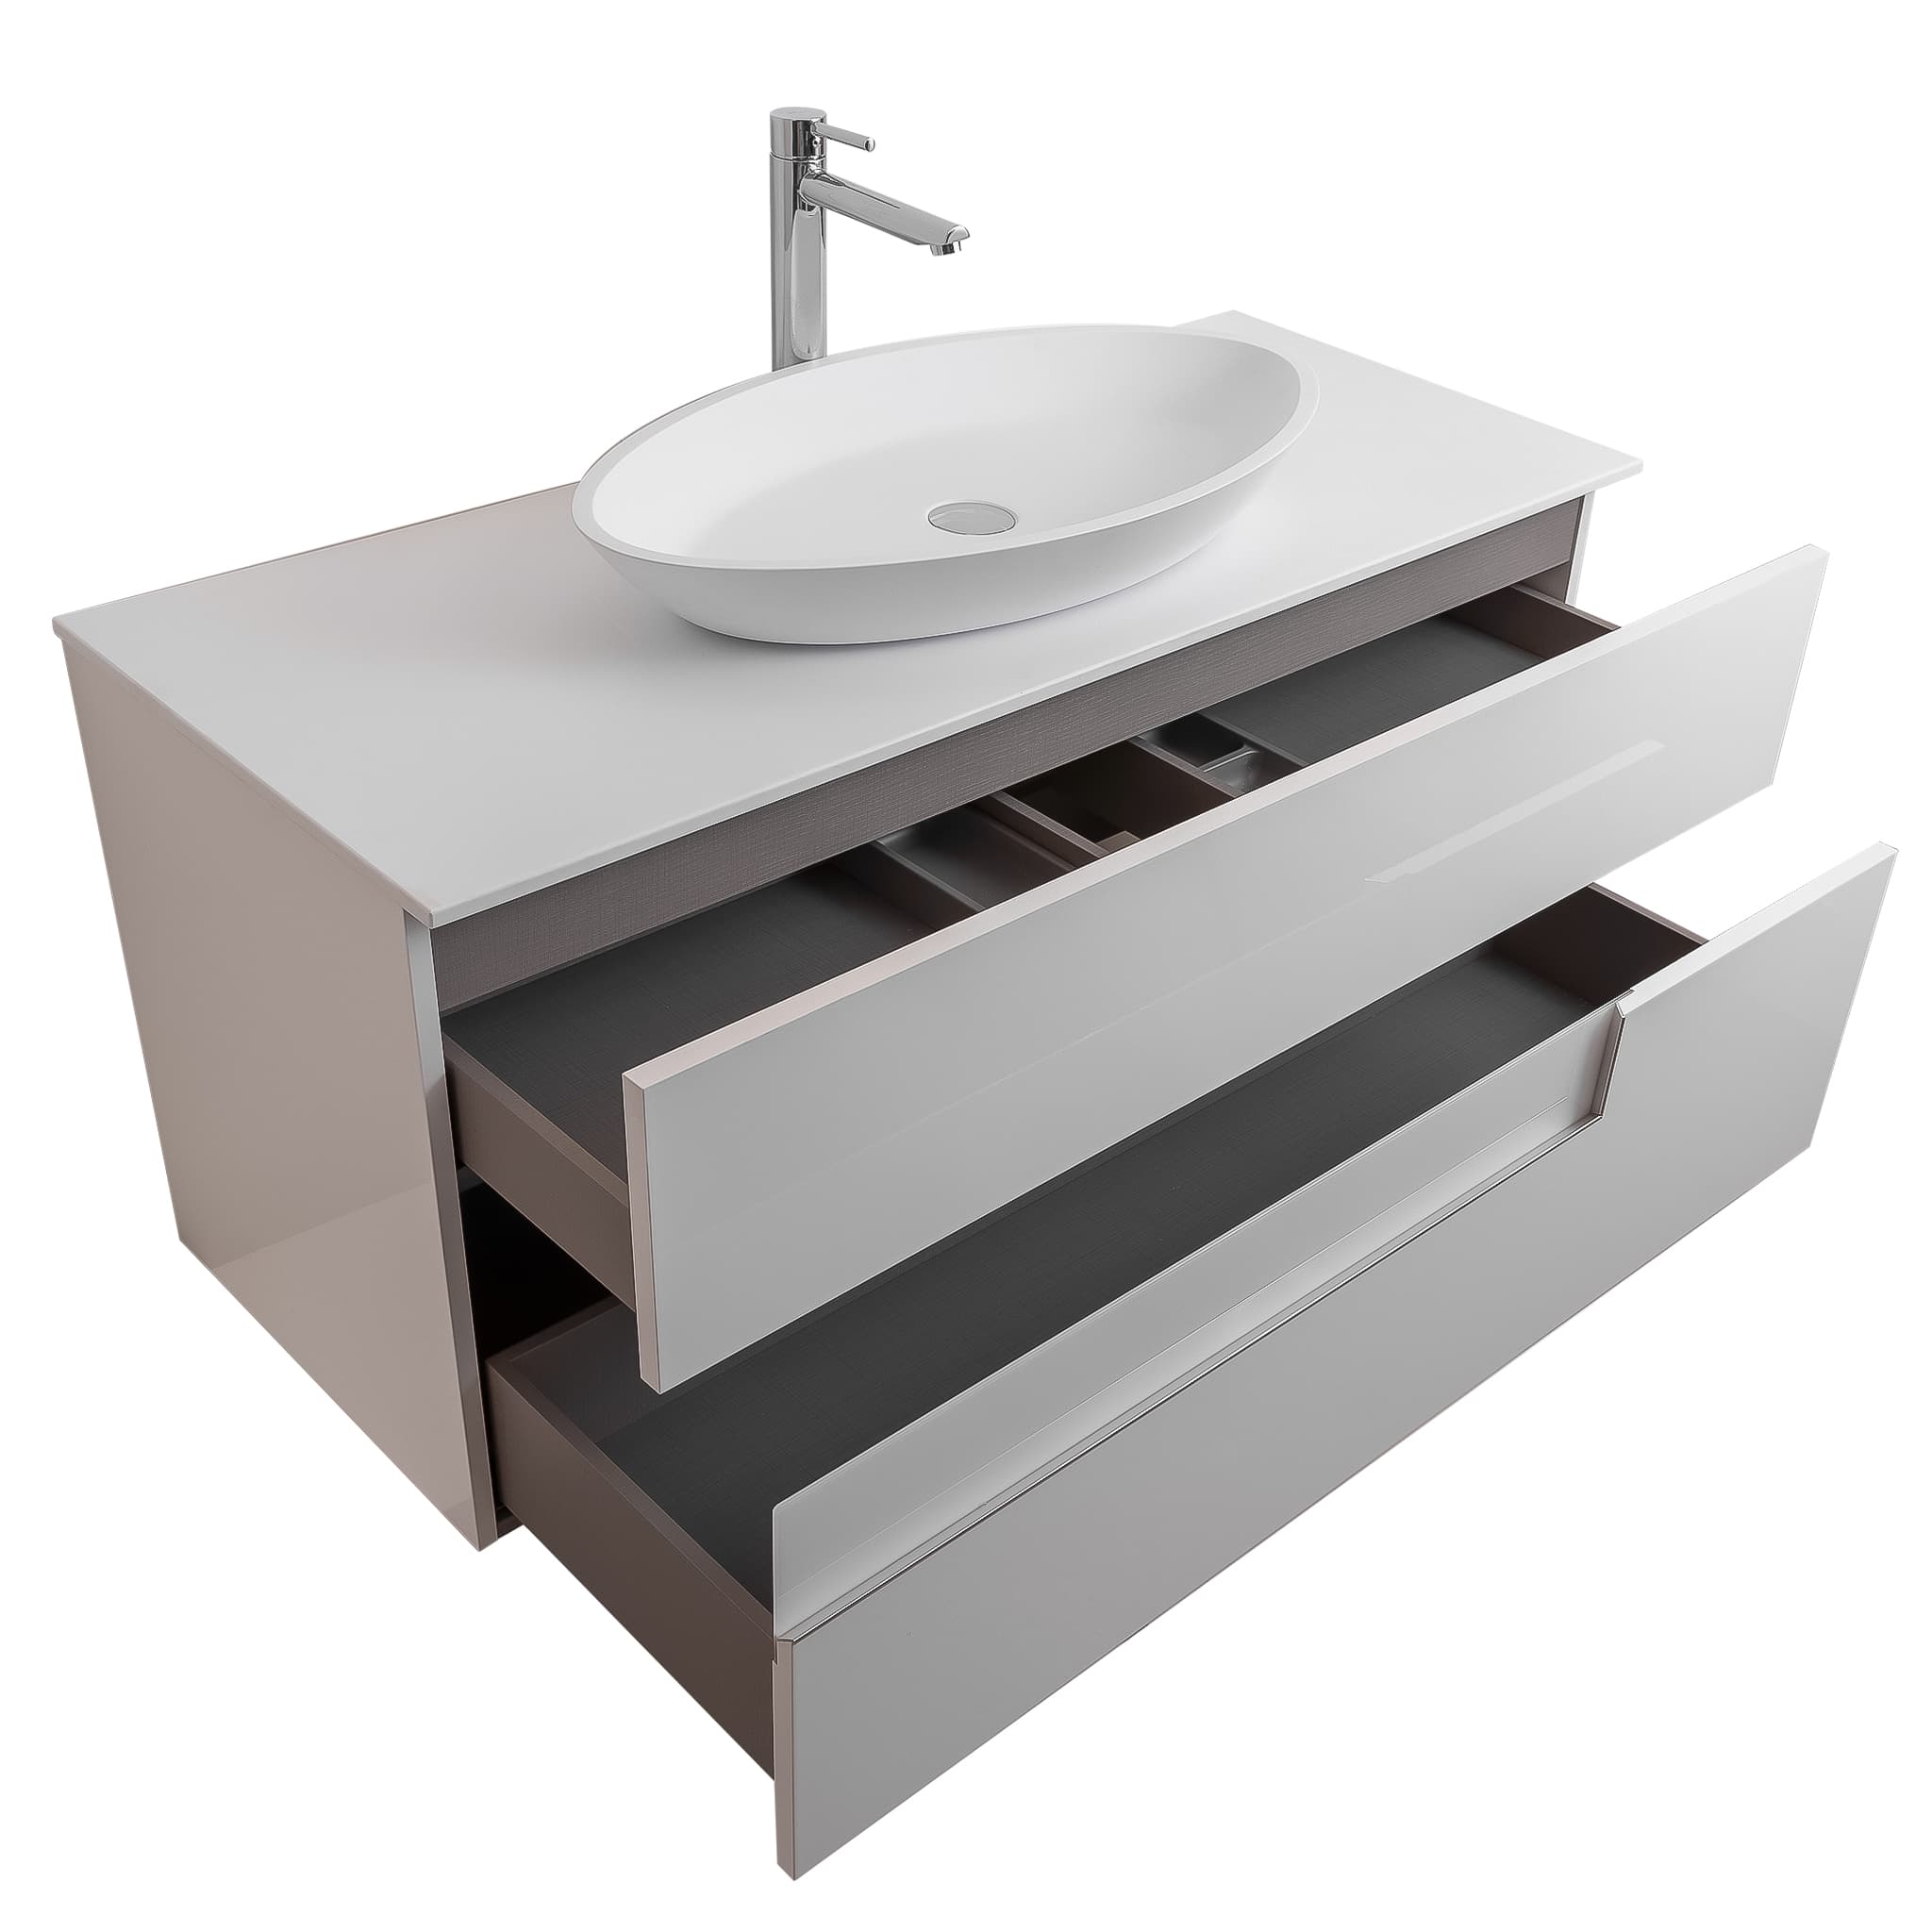 Vision 47.5 White High Gloss Cabinet, Solid Surface Flat White Counter And Oval Solid Surface White Basin 1305, Wall Mounted Modern Vanity Set